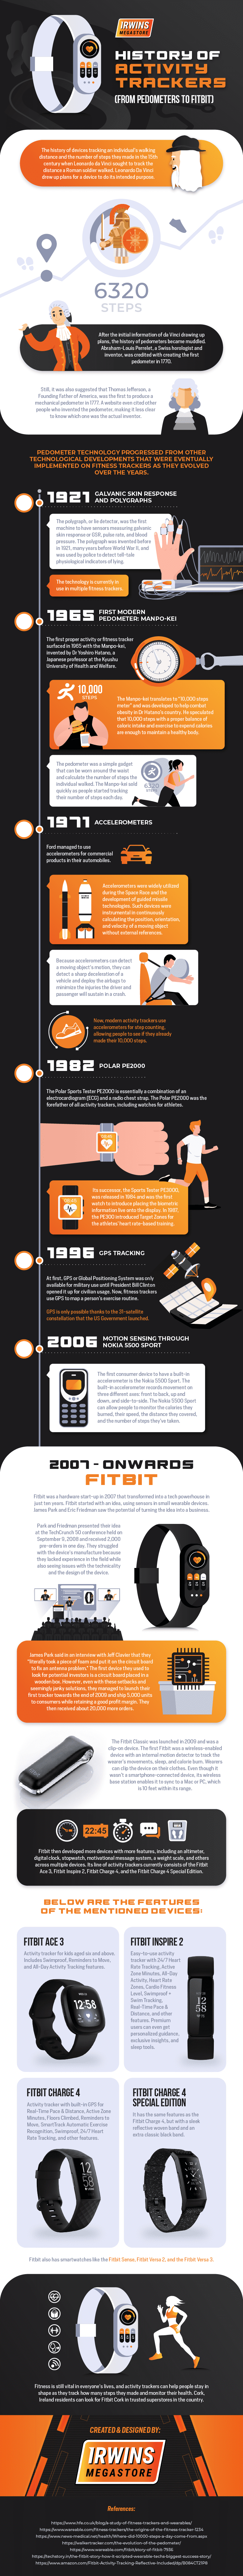 History of activity trackers from pedometers to Fitbit